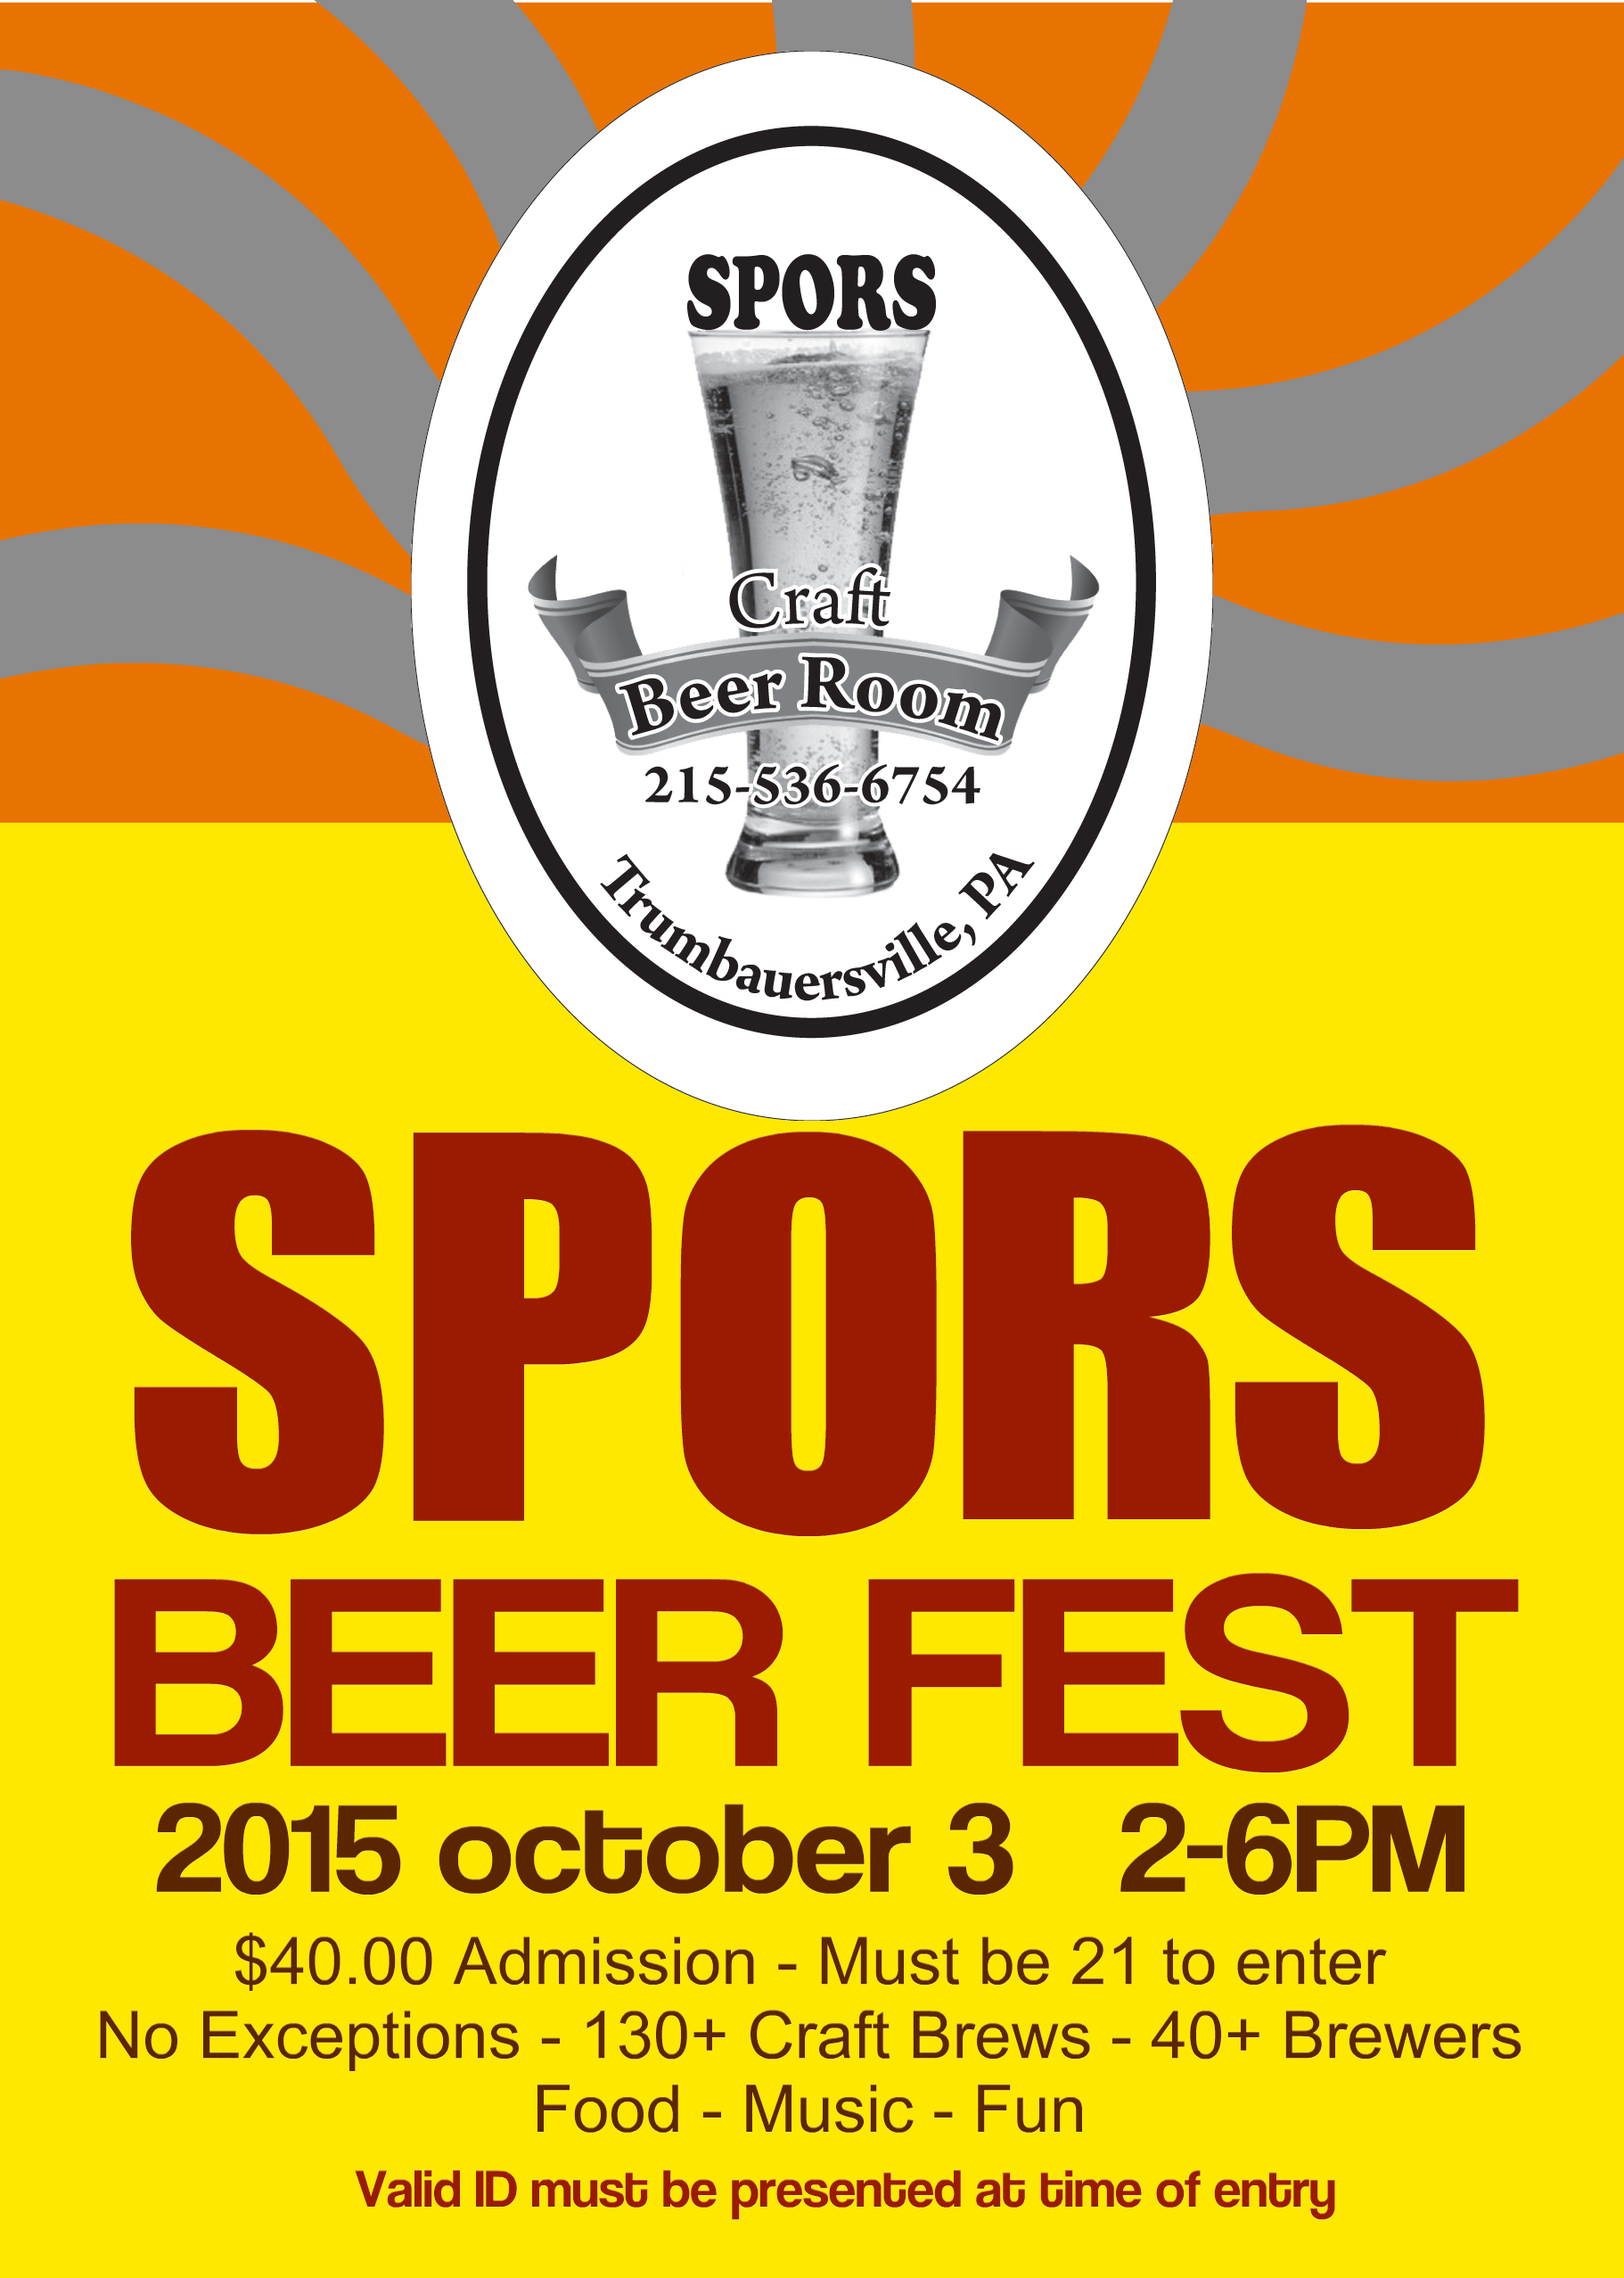 Spors General Store - Second Annual BeerFest